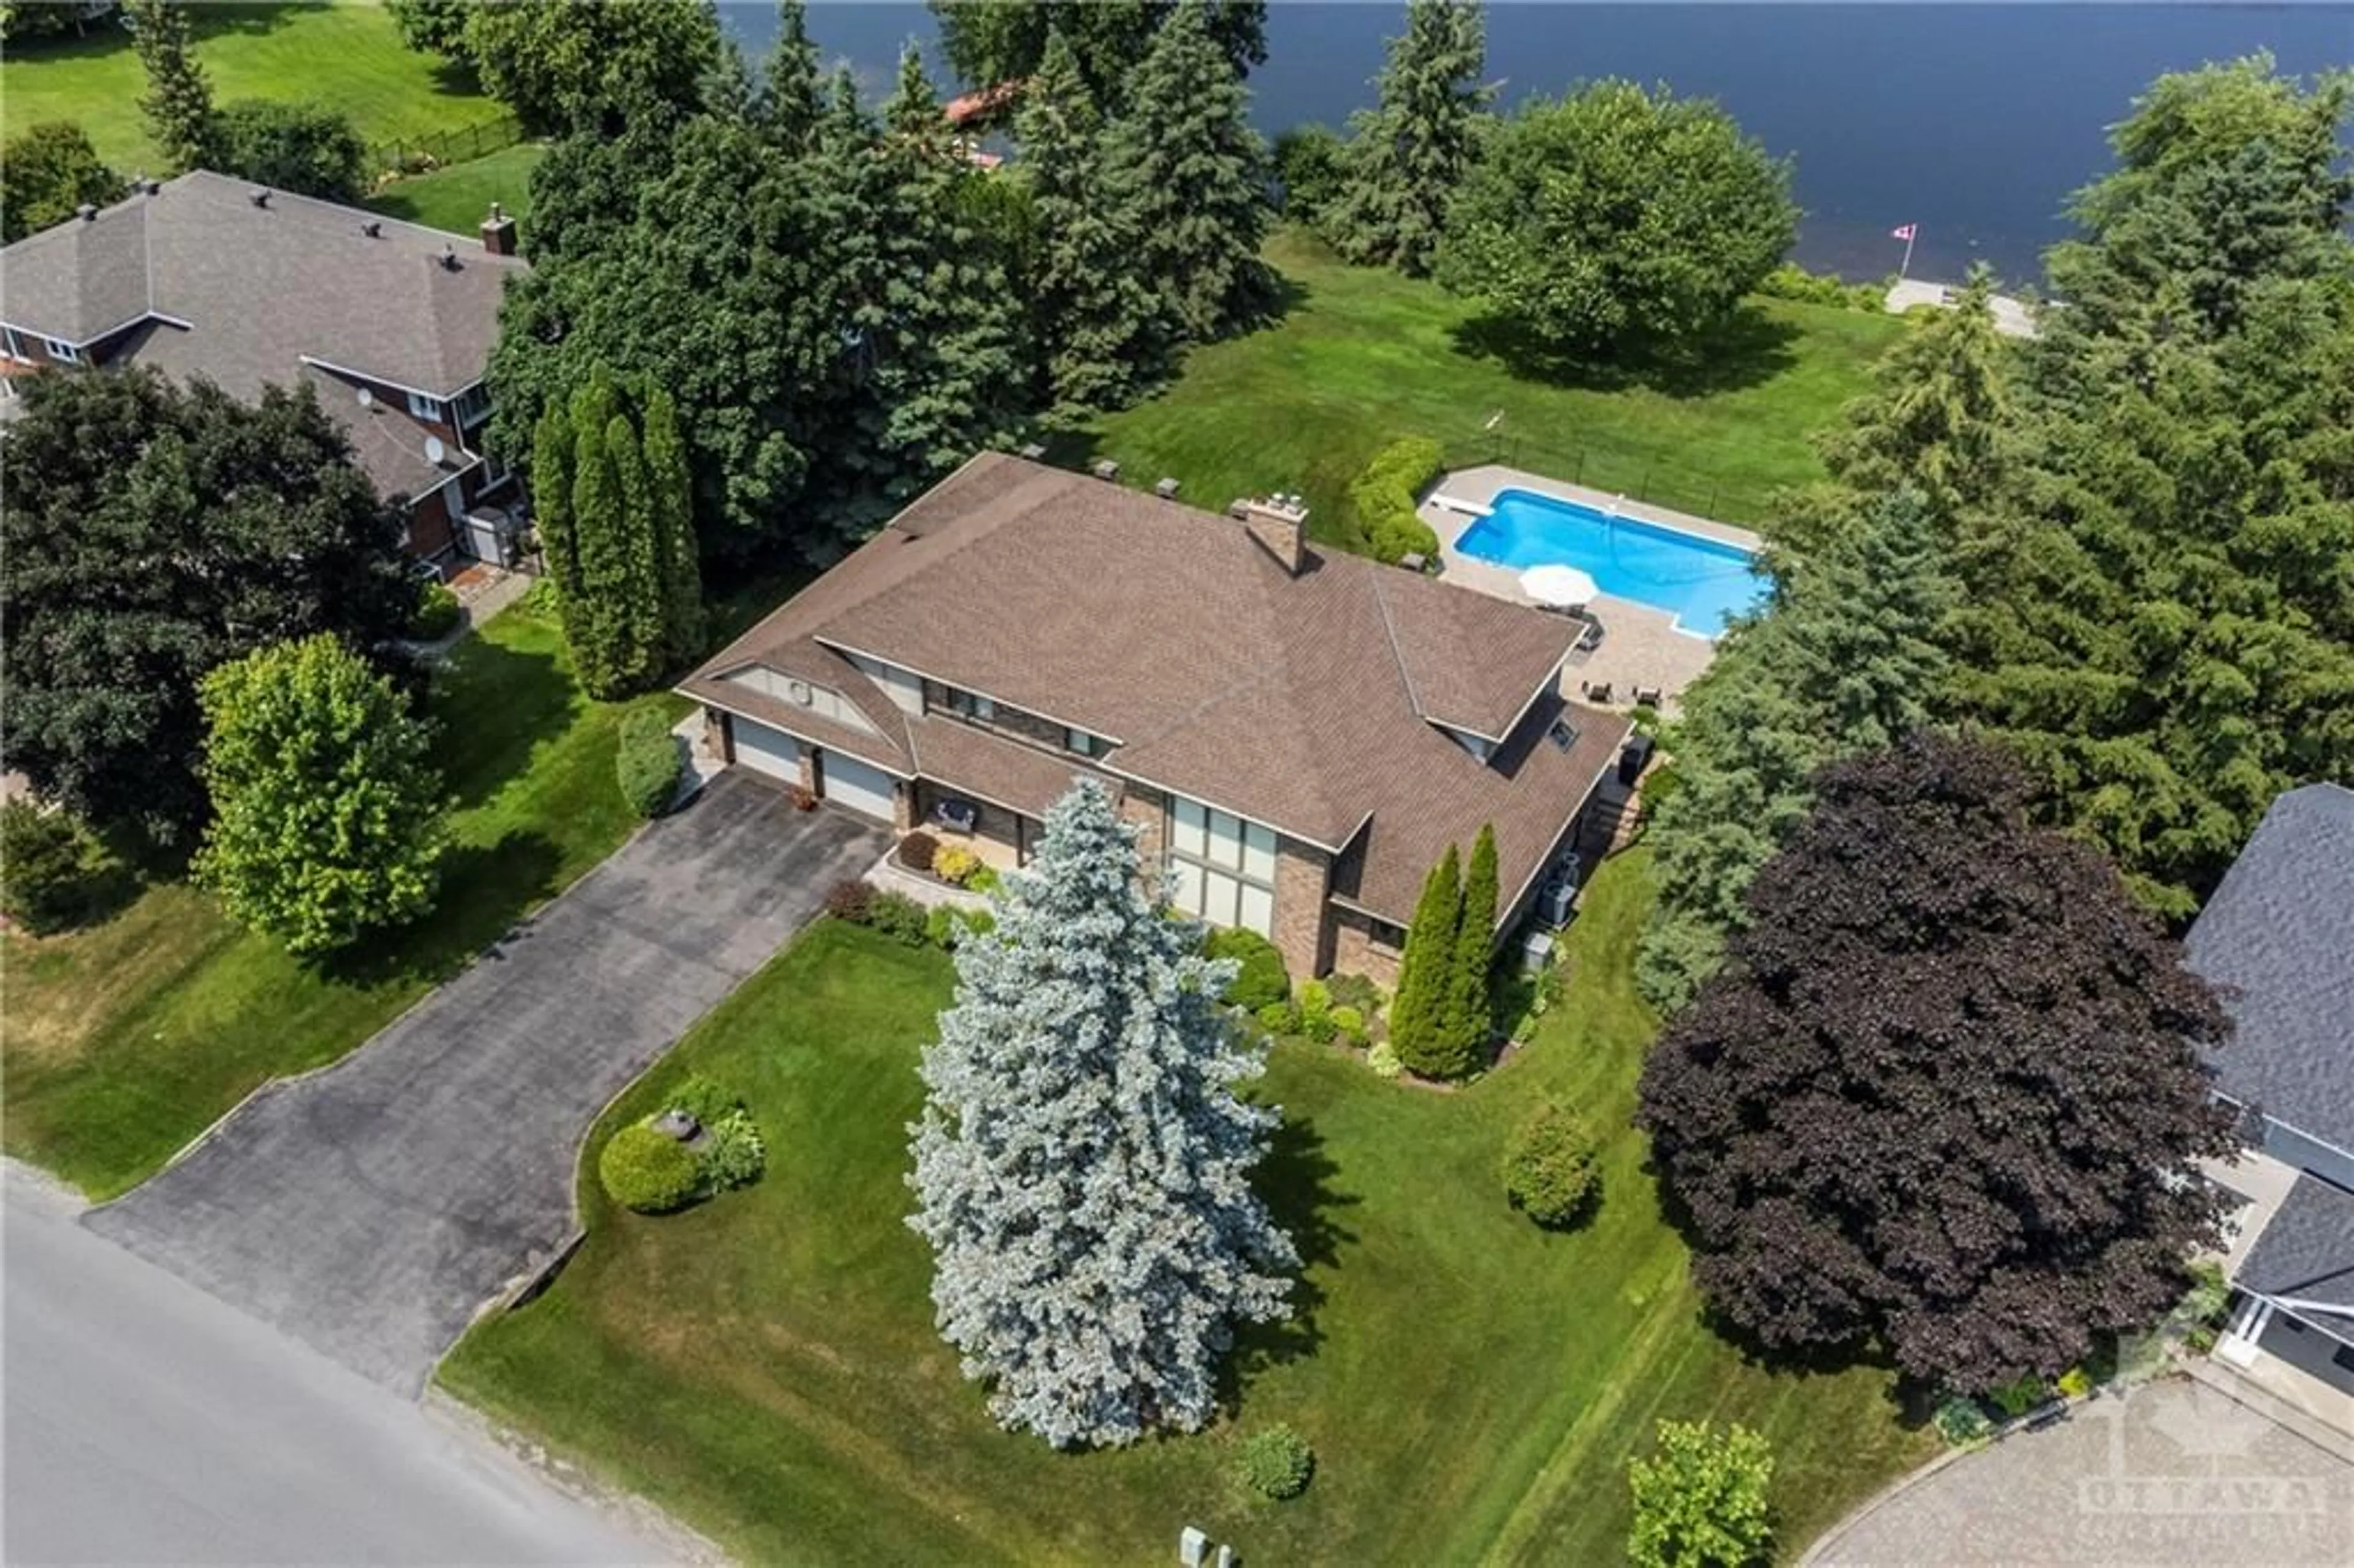 Lakeview for 5533 SOUTH ISLAND PARK Dr, Manotick Ontario K4M 1J2